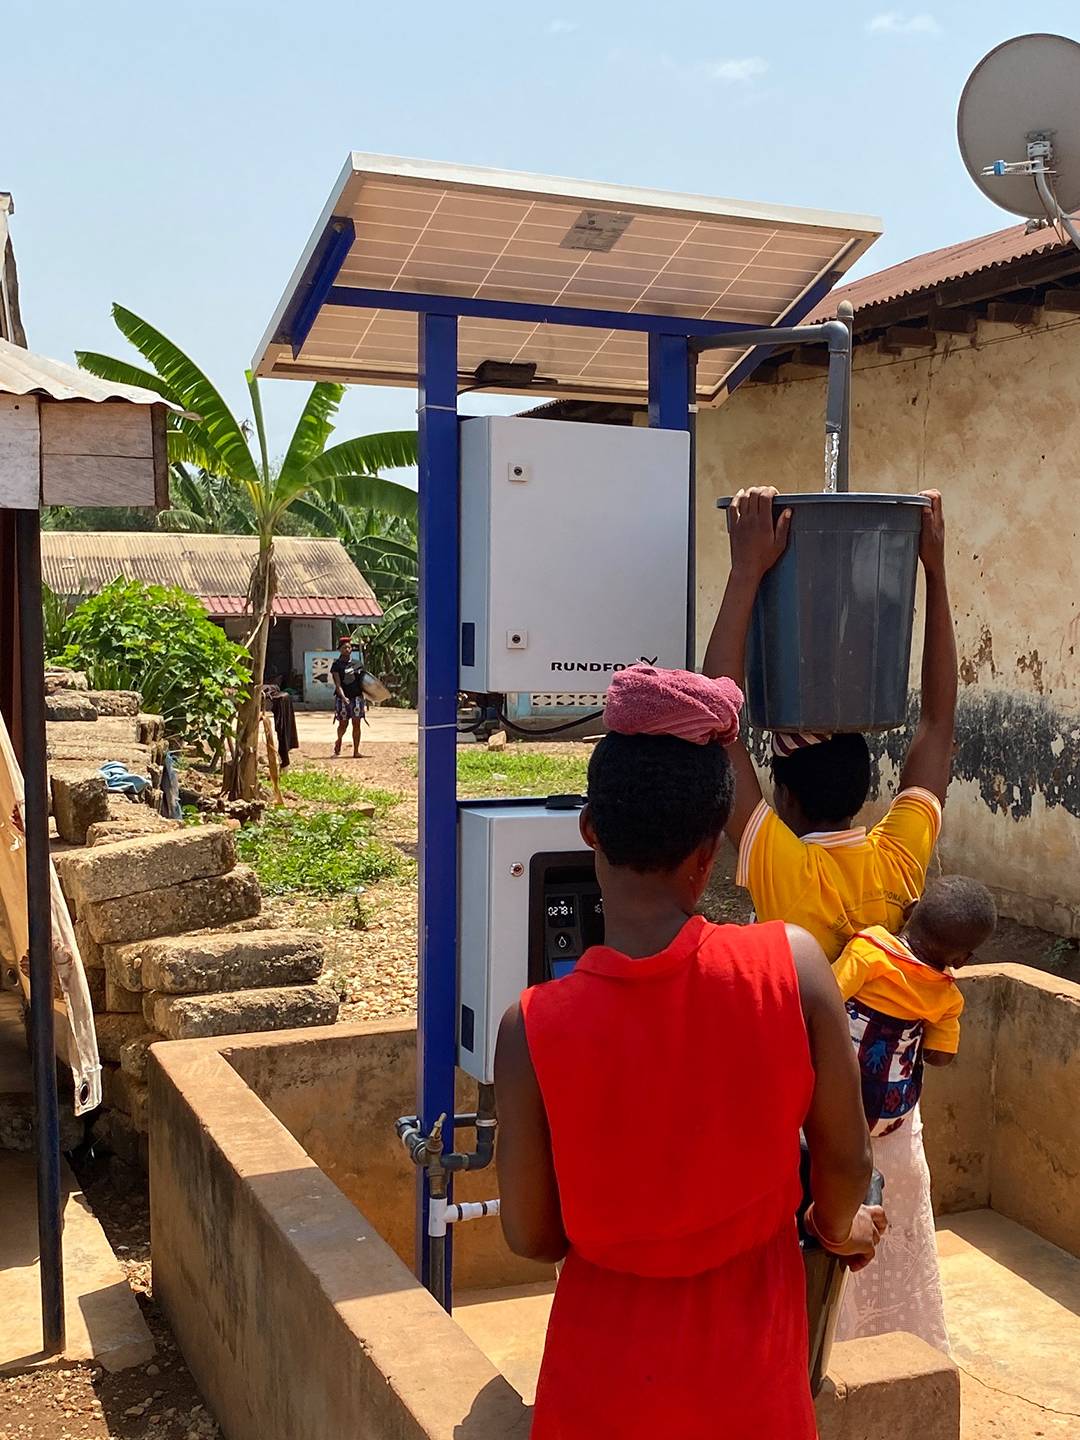 Smart and prepaid water systems make their way in rural Ghana